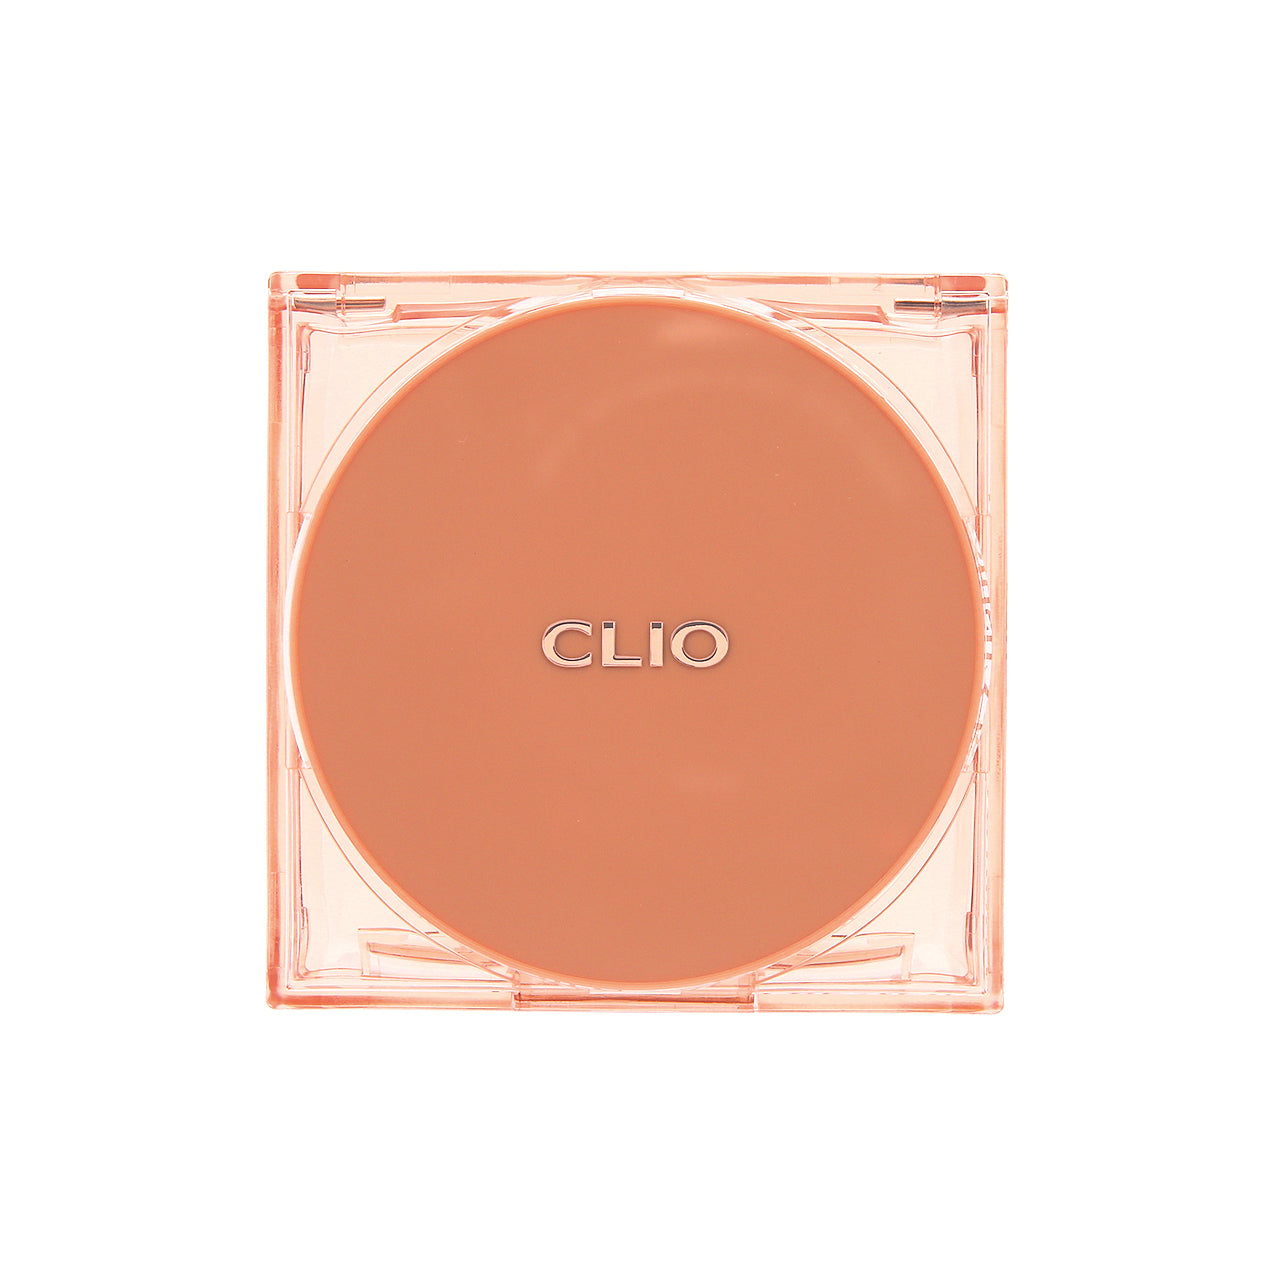 Clio Upgraded Magic Ultimate Long Lasting Flawless Cushion Foundation Koshort Limited Edition 03 Natural Brightening 15g x 2pcs